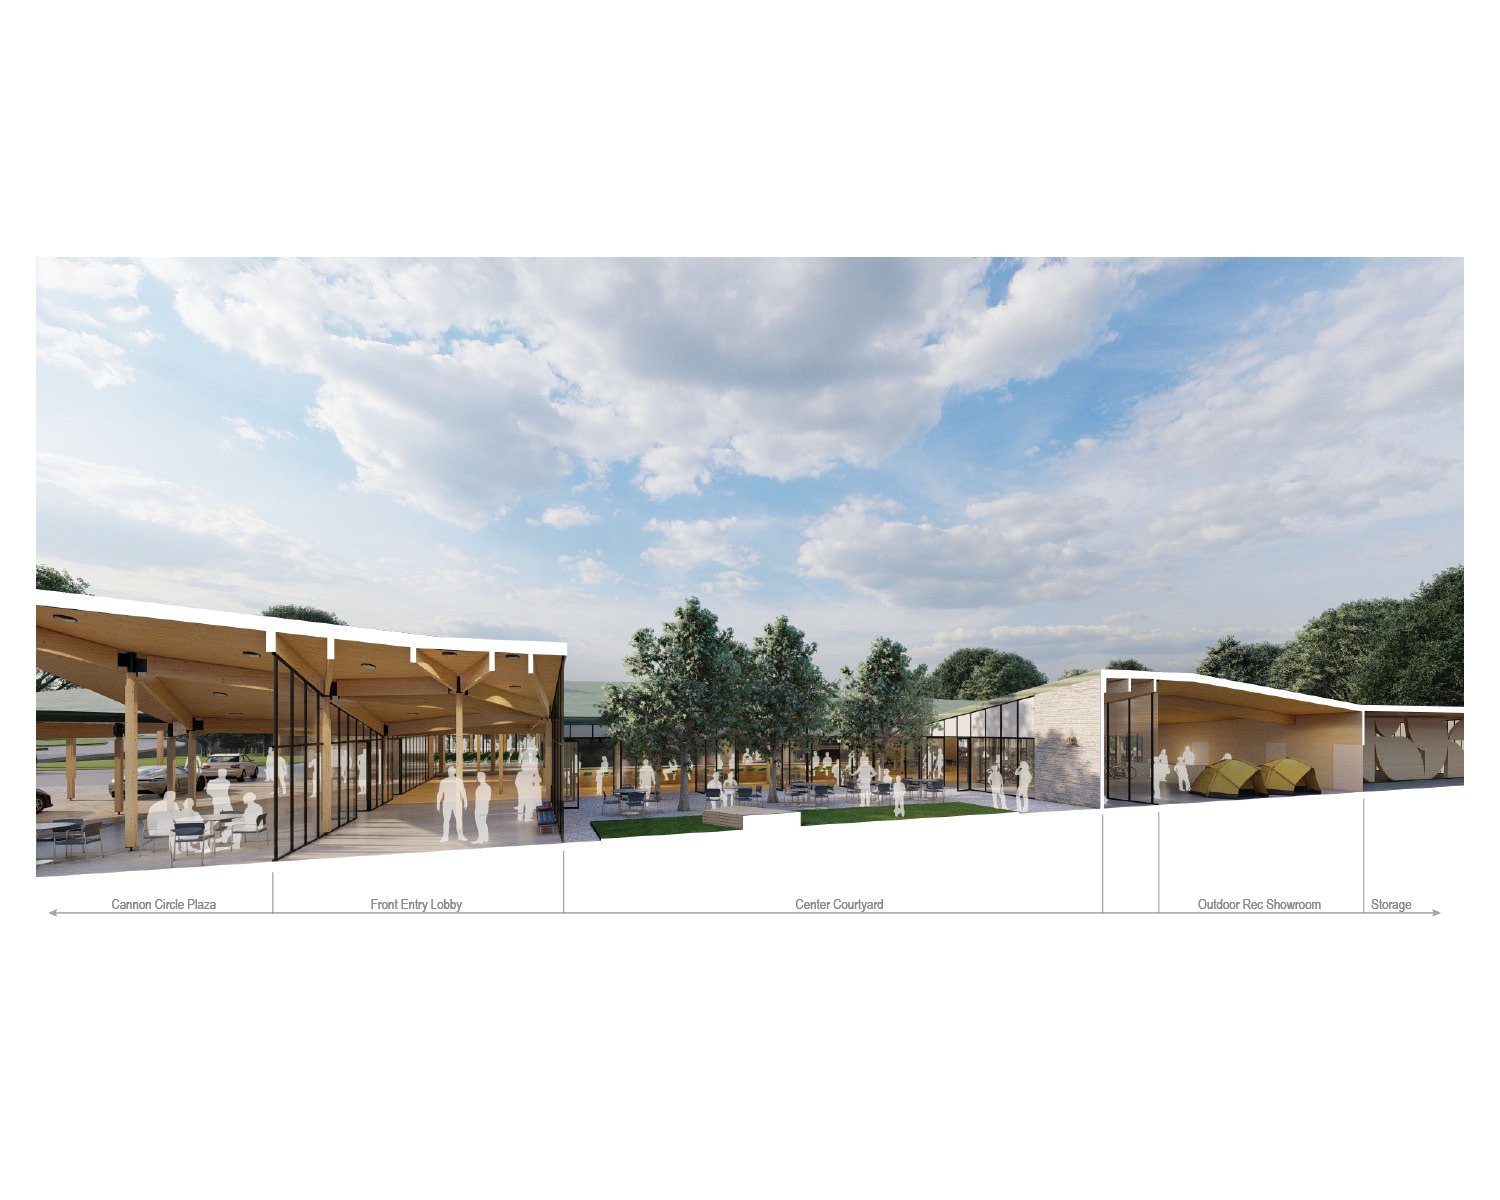 North-south section from west edge of public concourse and showing Outdoor Recreation Showroom | University of Arkansas Community Design Center